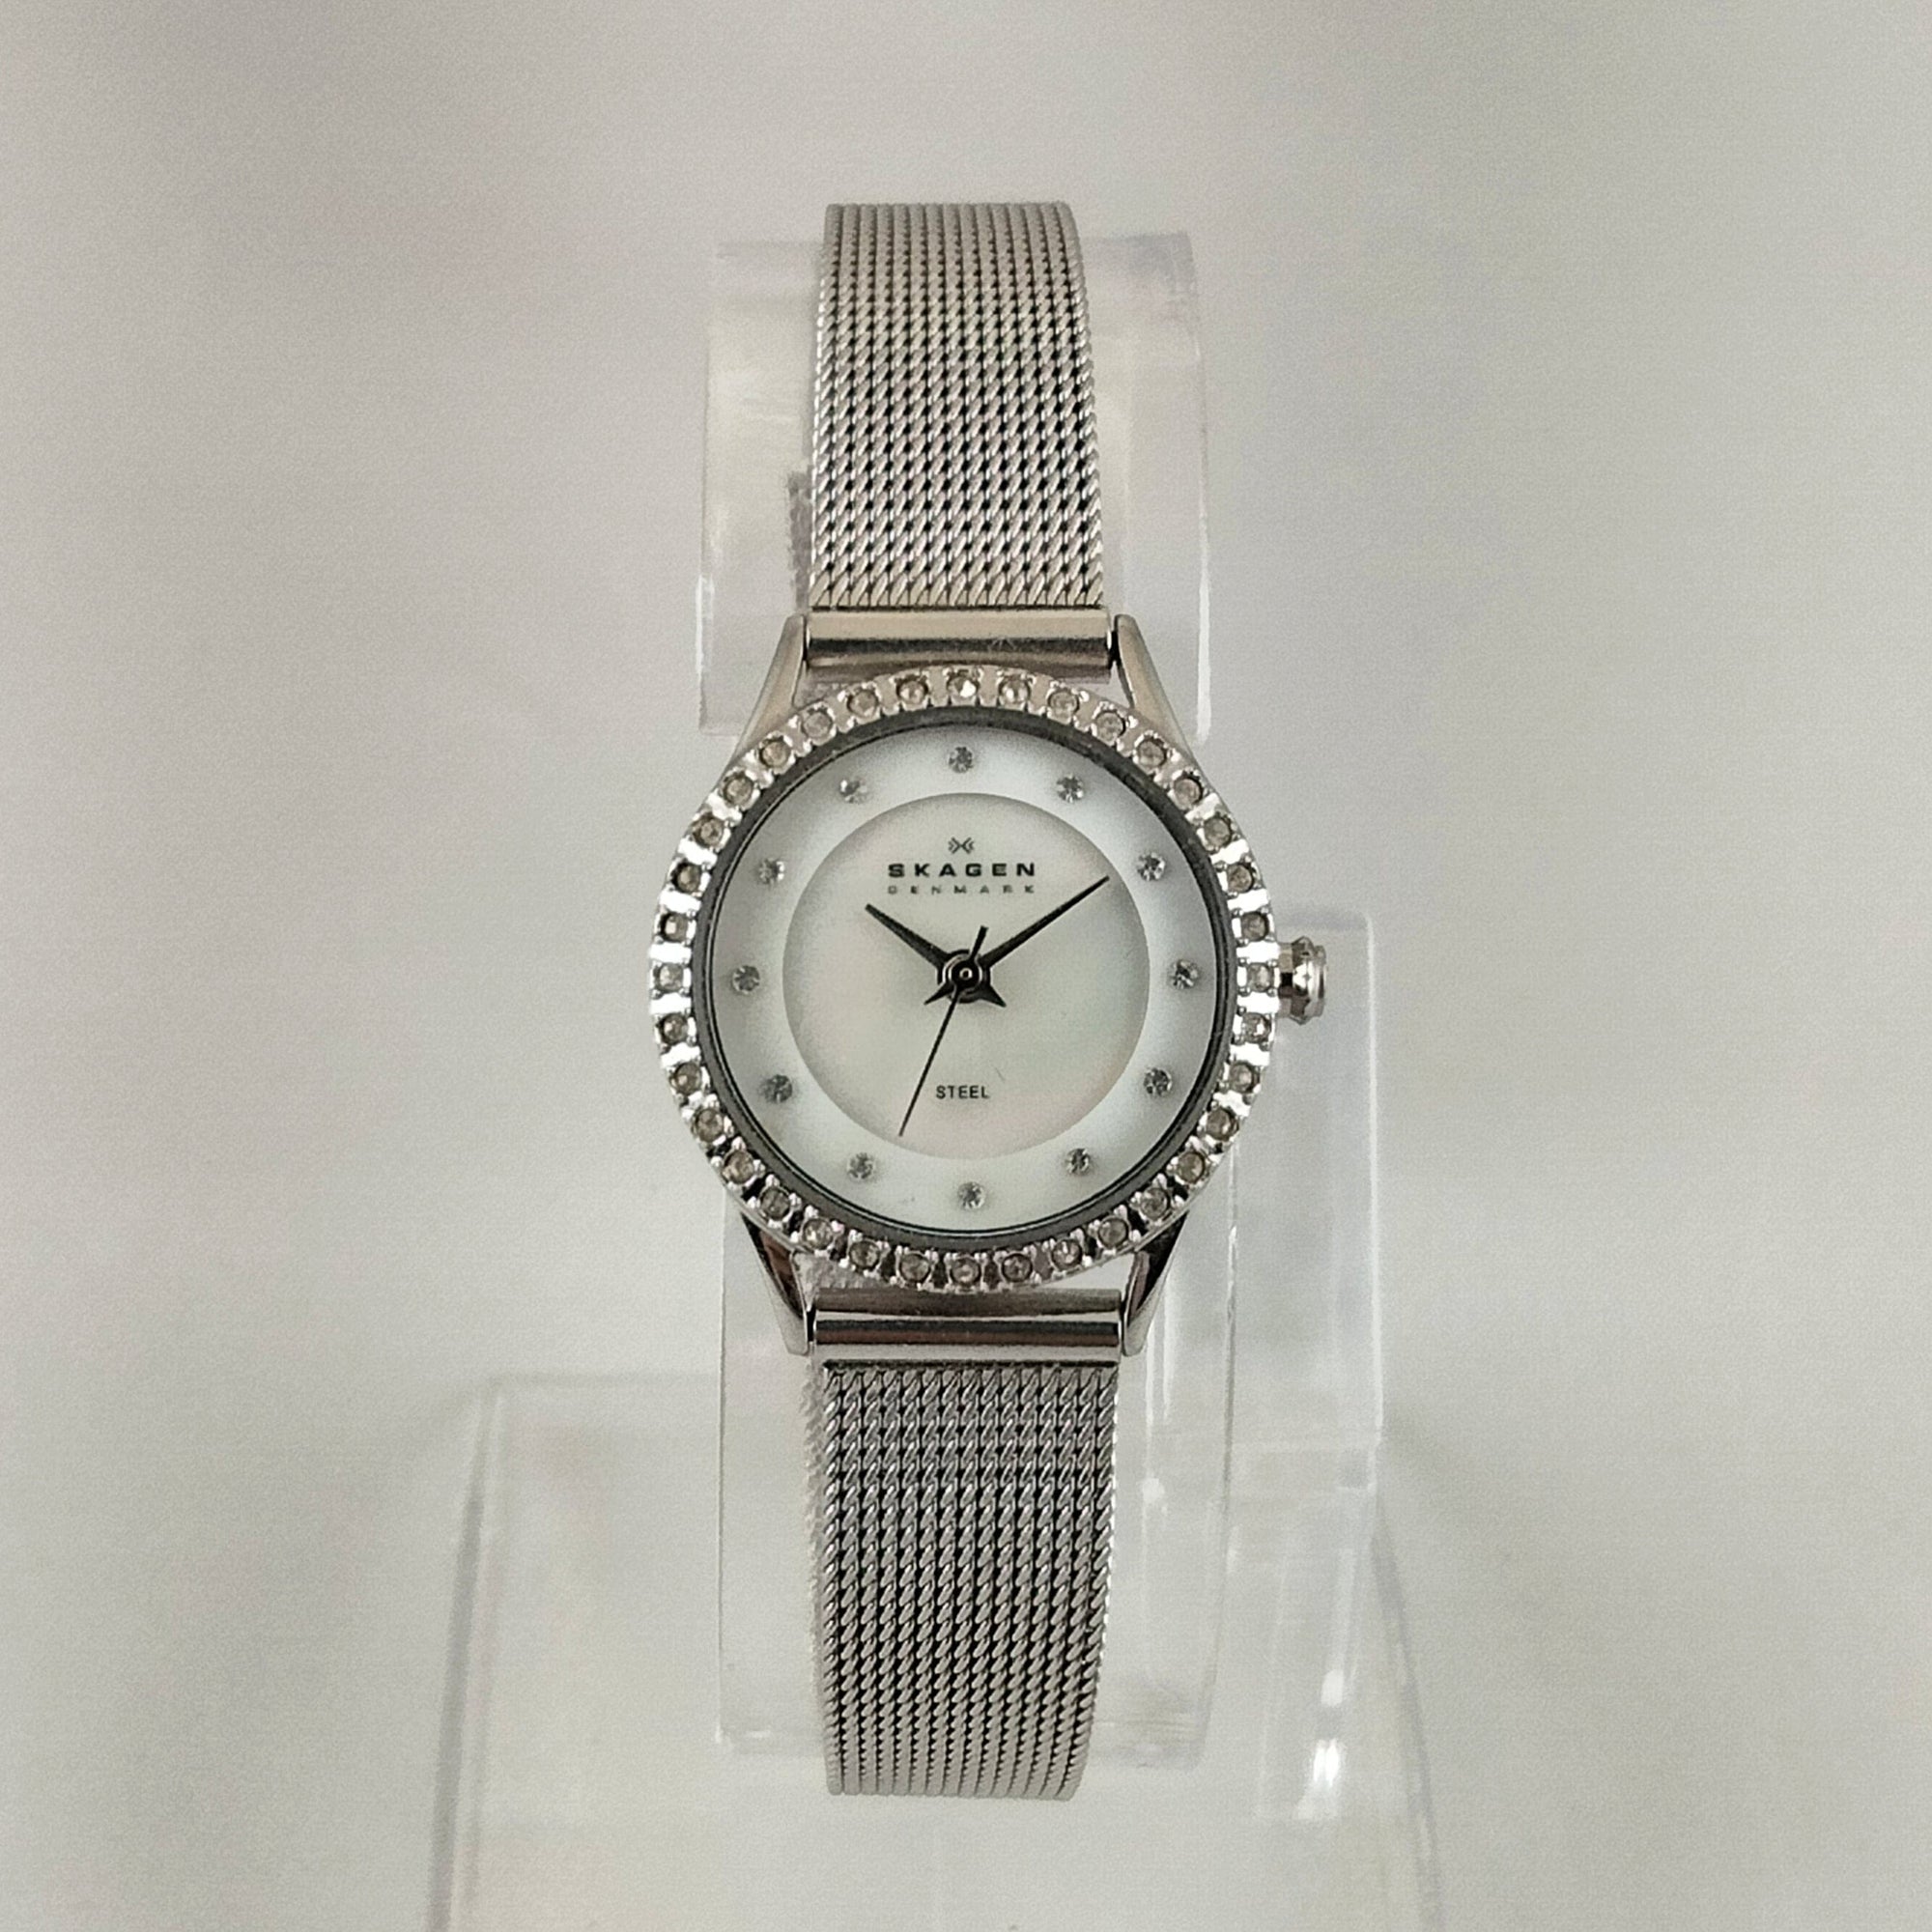 I Like Mikes Mid Century Modern Watches Skagen Women's Stainless Steel Watch, Mother of Pearl Dial, Jewel Framed Face, Mesh Strap